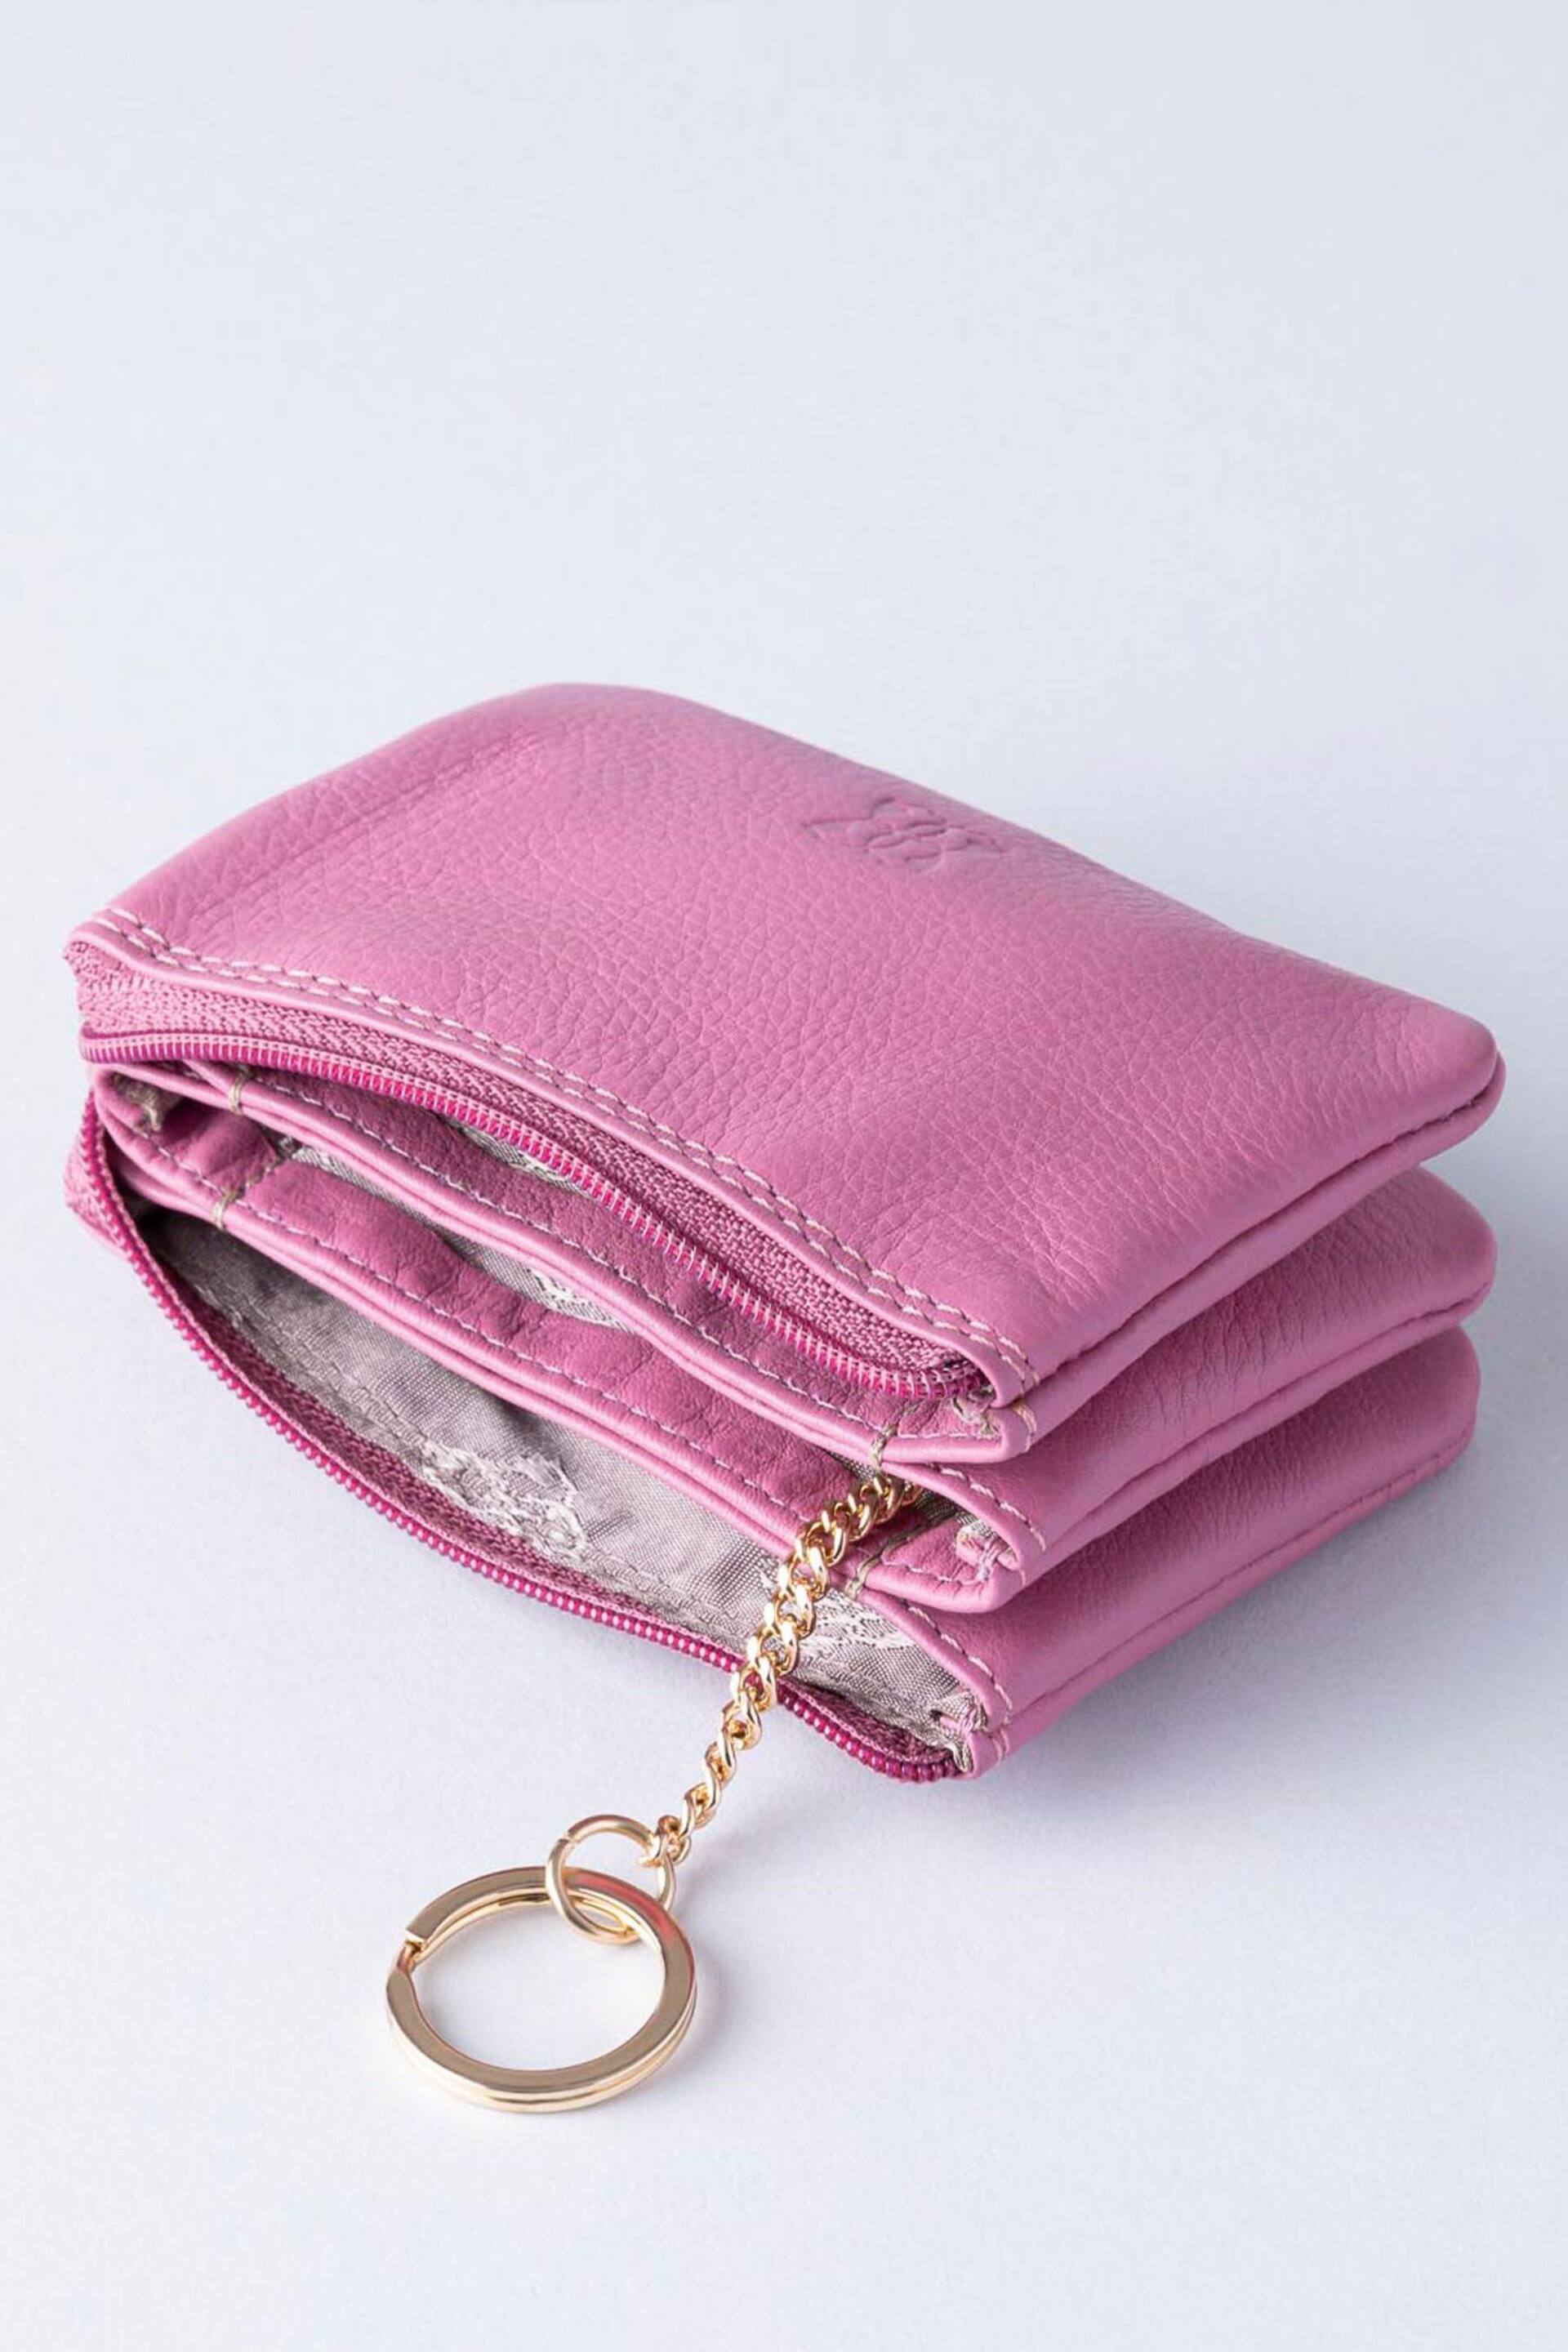 Lakeland Leather Mauve Pink Protected Leather Coin Purse - Image 4 of 4